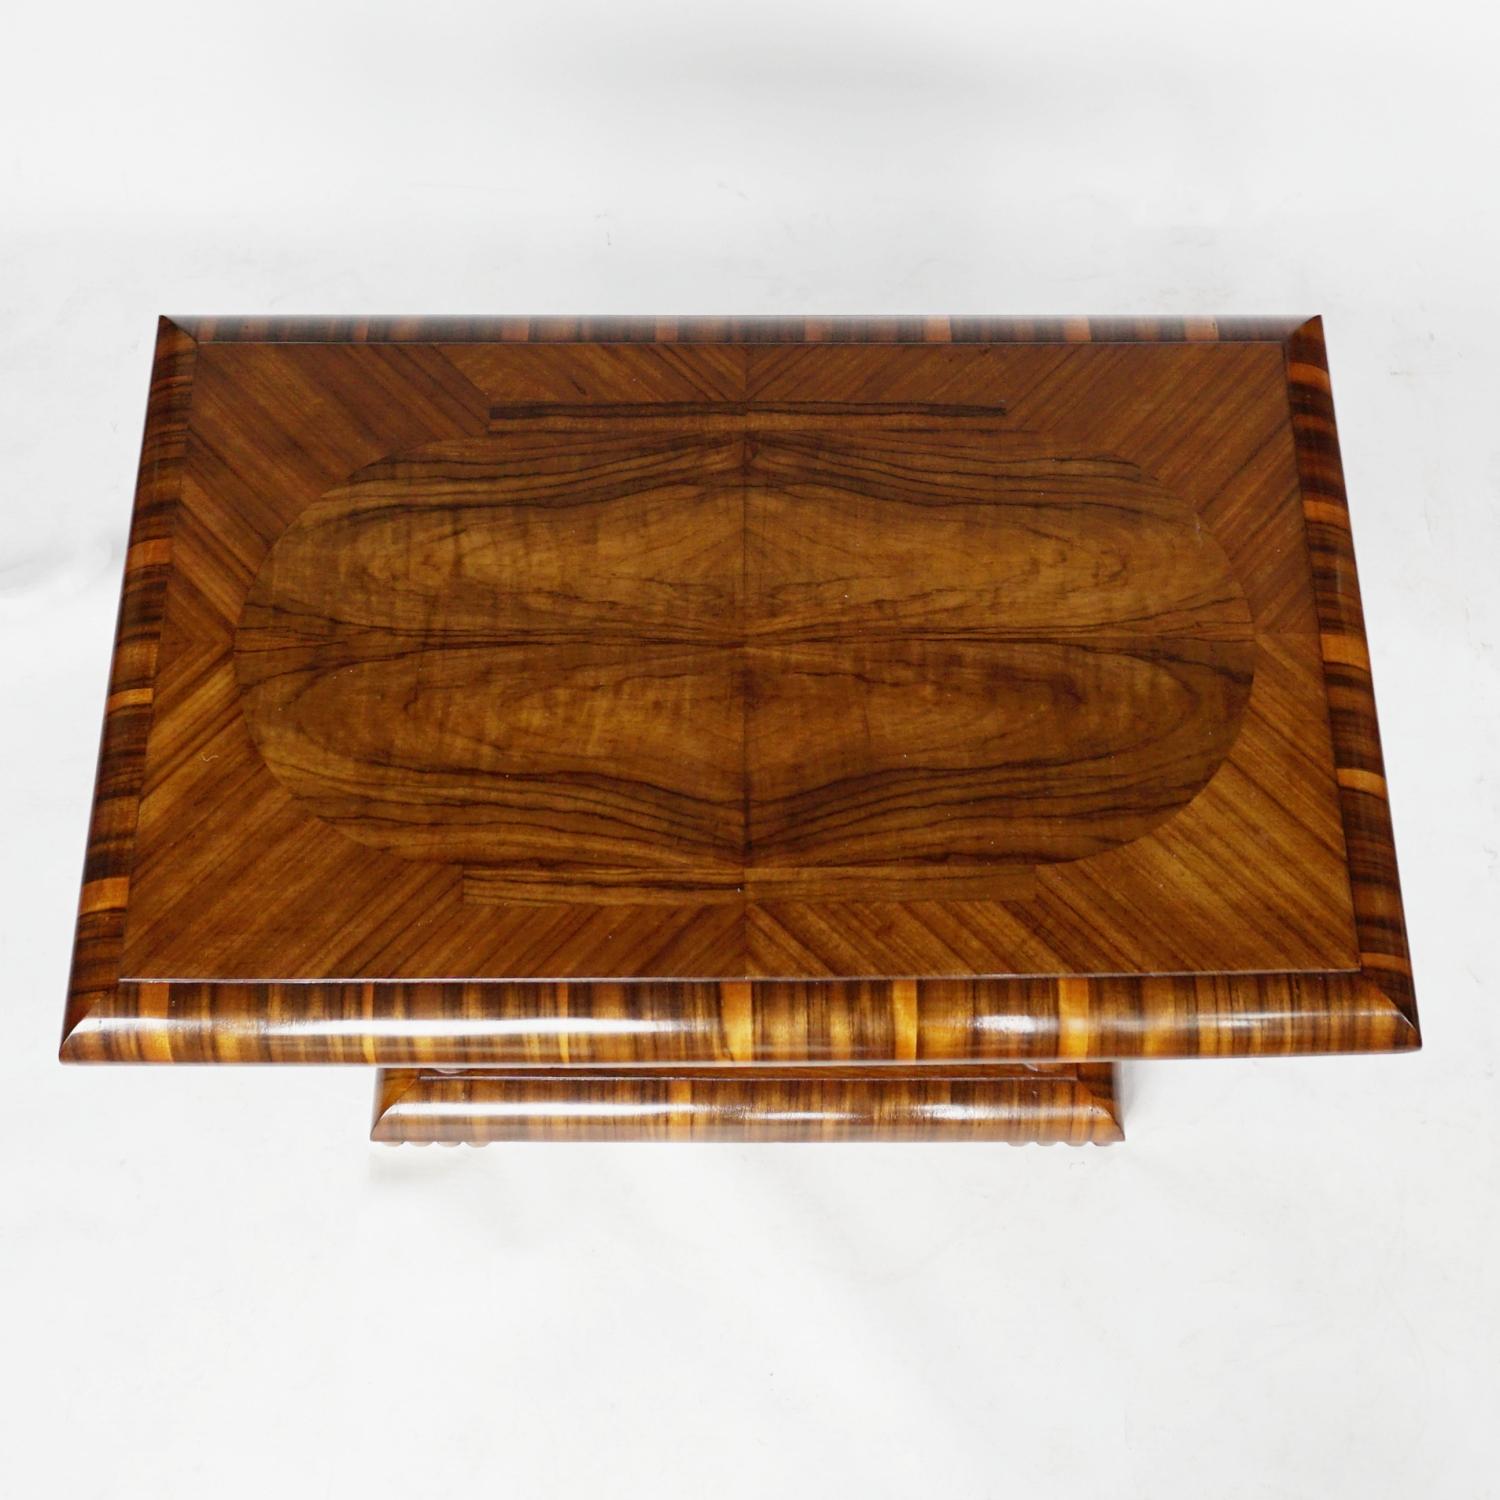 An Art Deco coffee/occasional table. Burr walnut and Macassar ebony veneer throughout set over four square pad feet.

Dimensions: H 62cm, W 84cm, D 54cm 

Origin: English

Date: Circa 1935

Item number: 1905212

All of our furniture is